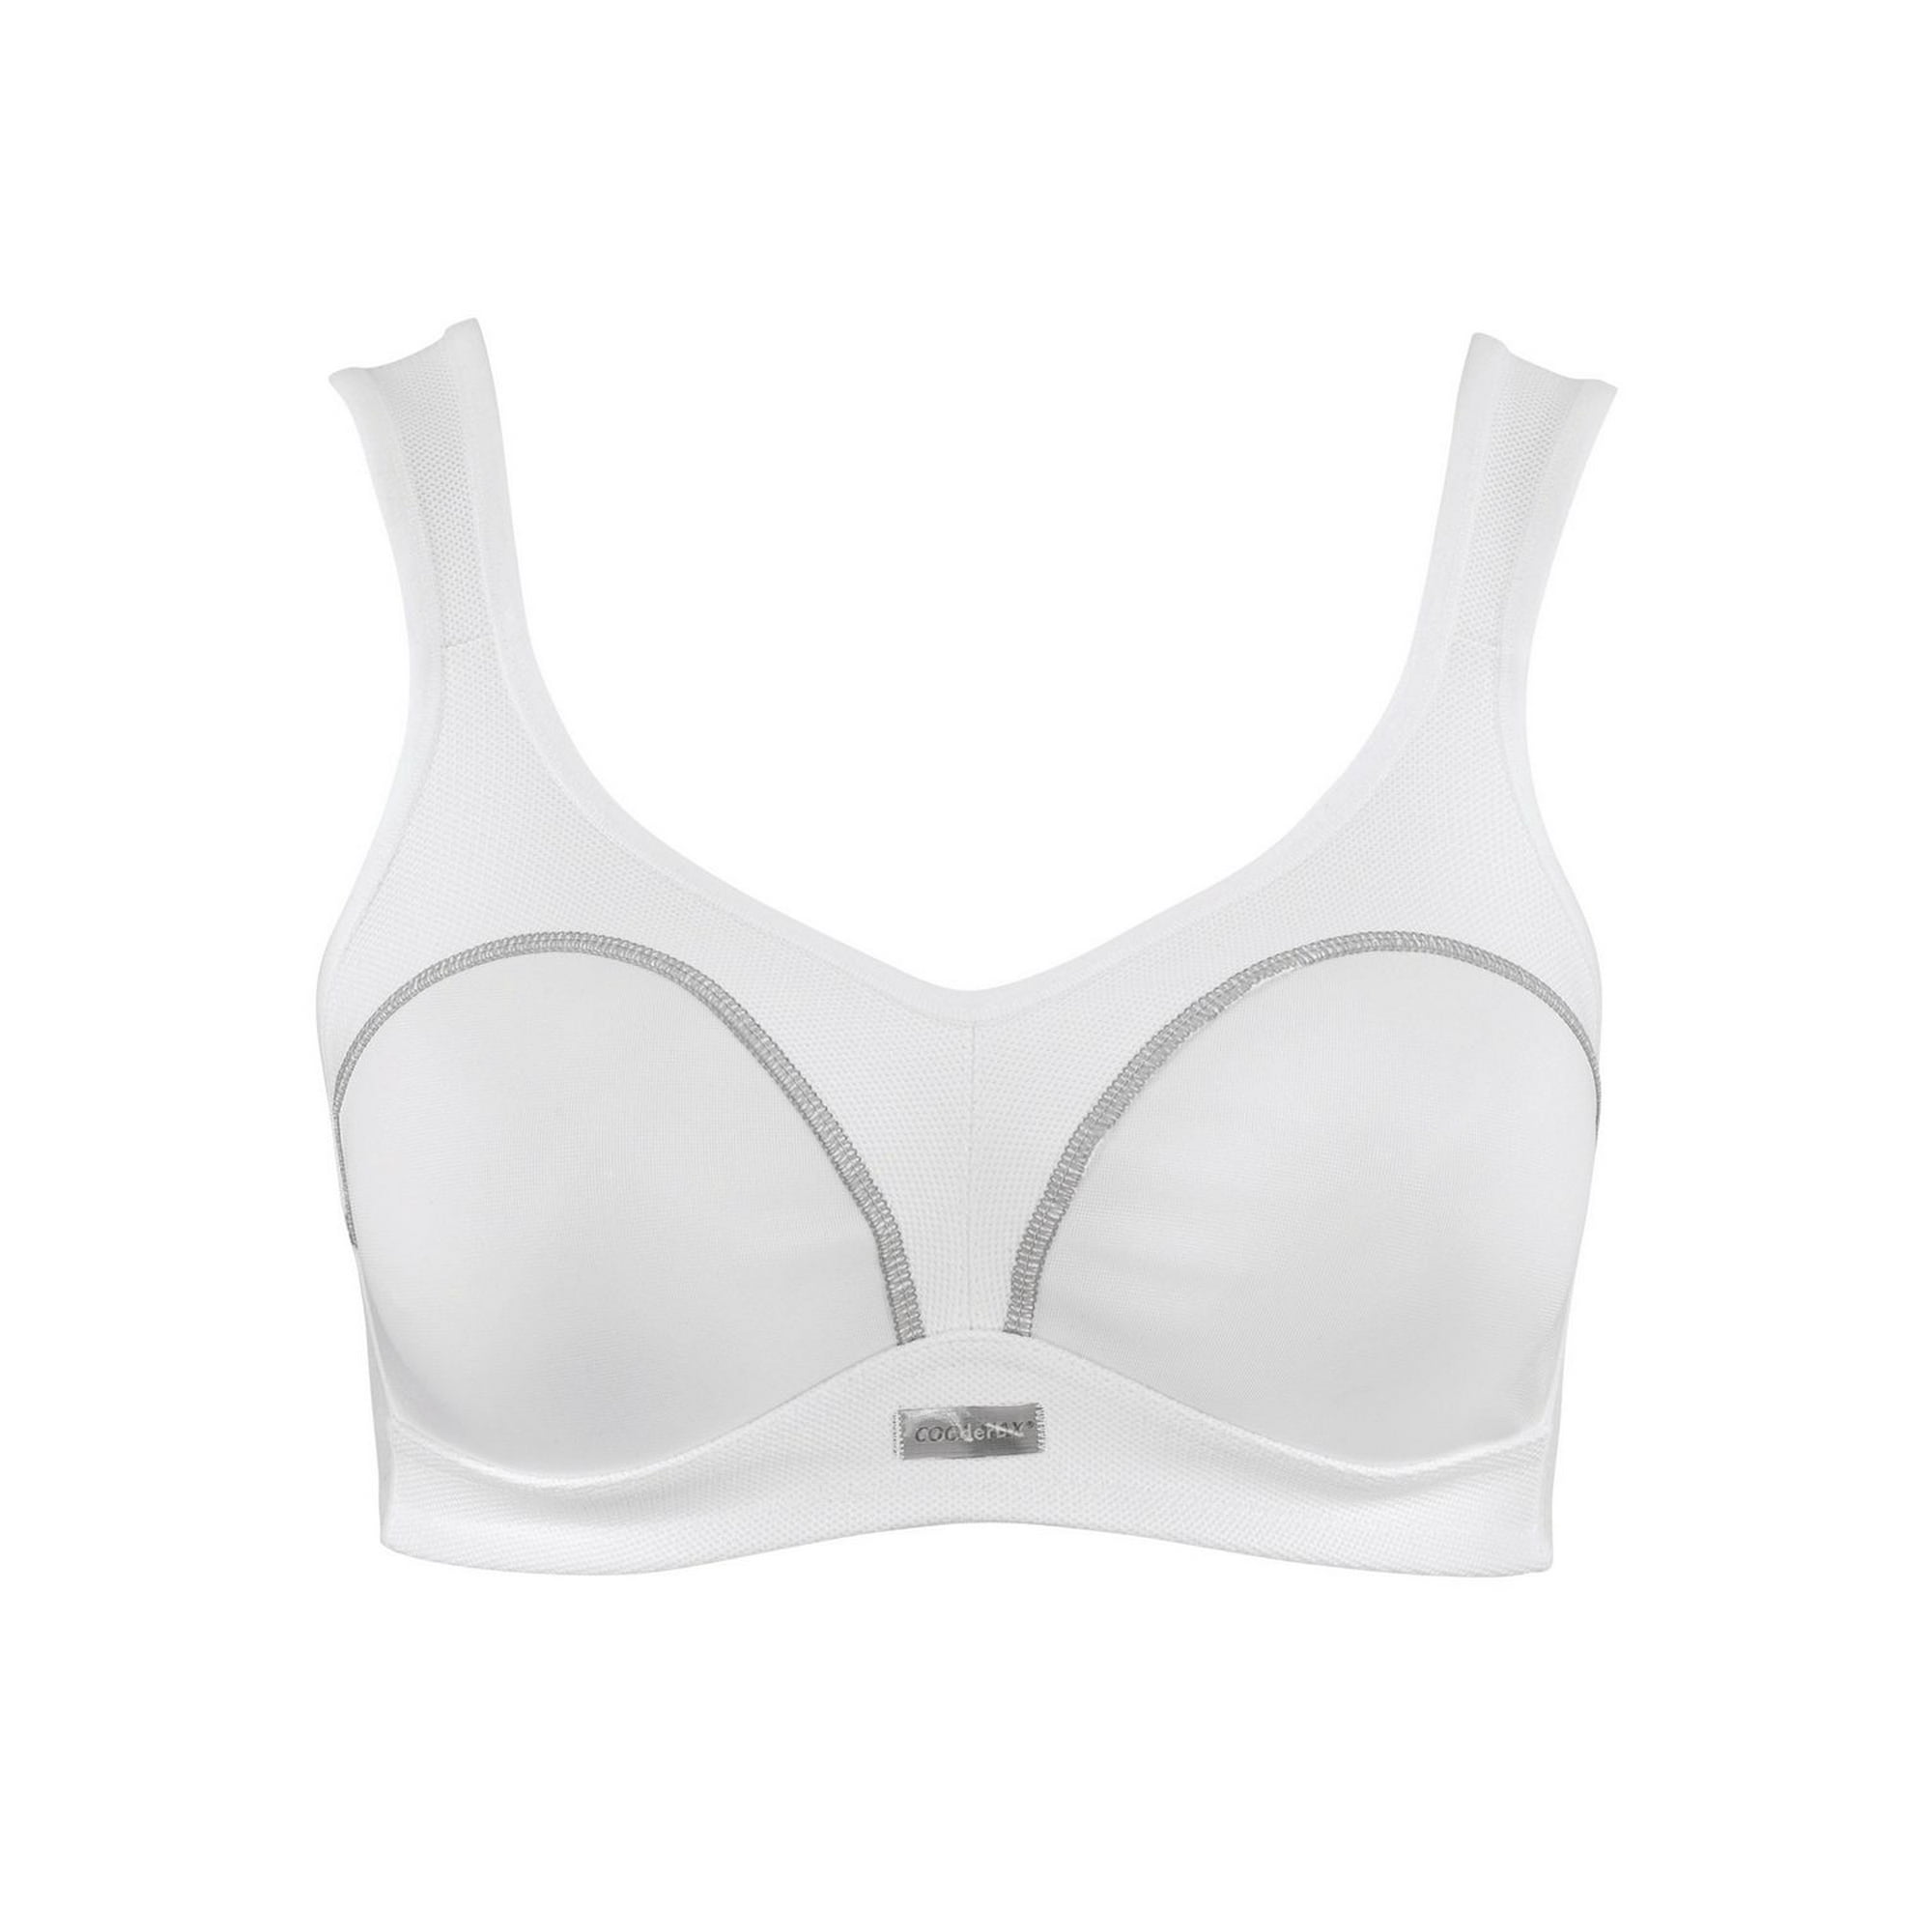 Bendon Sport Max Out High Impact Underwire Sports Bra White 34DD 73-408  MSRP $55